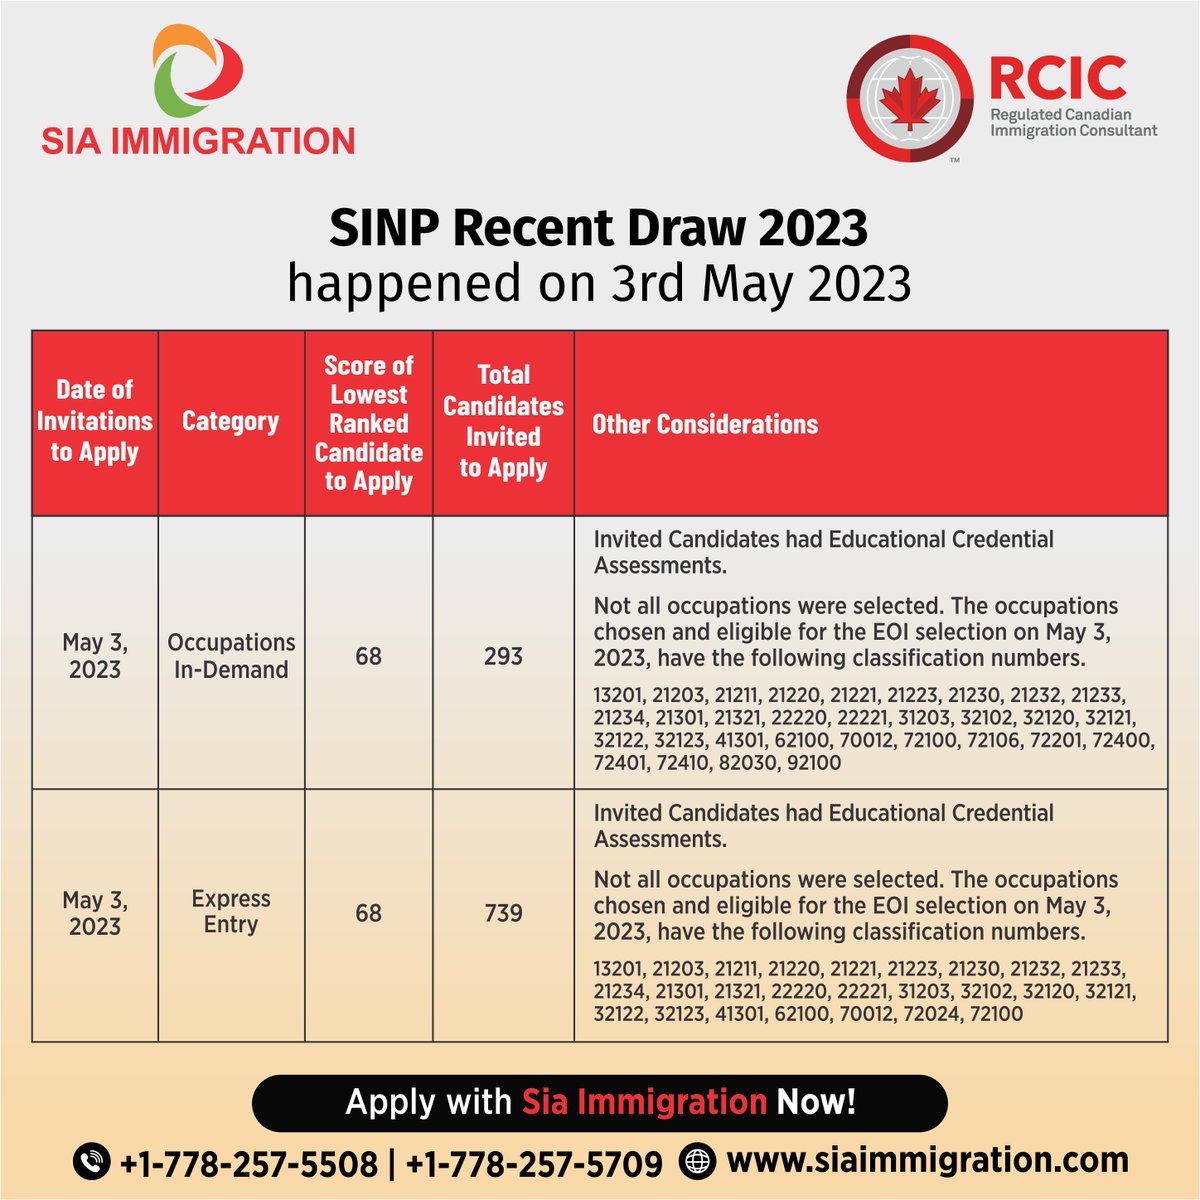 SINP Recent Draw 2023 happened on 3rd May 2023.
siaimmigration.com/sinp-point-cal…

Apply Now @ +1-778-257-5508, +1-778-257-5709
visit: siaimmigration.com

#SINP #GeneralDraw #SINPDraw2023 #MayDraw2023 #LatestDrawSINP #BritishColumbia #Consultant #InternationalGraduates #University